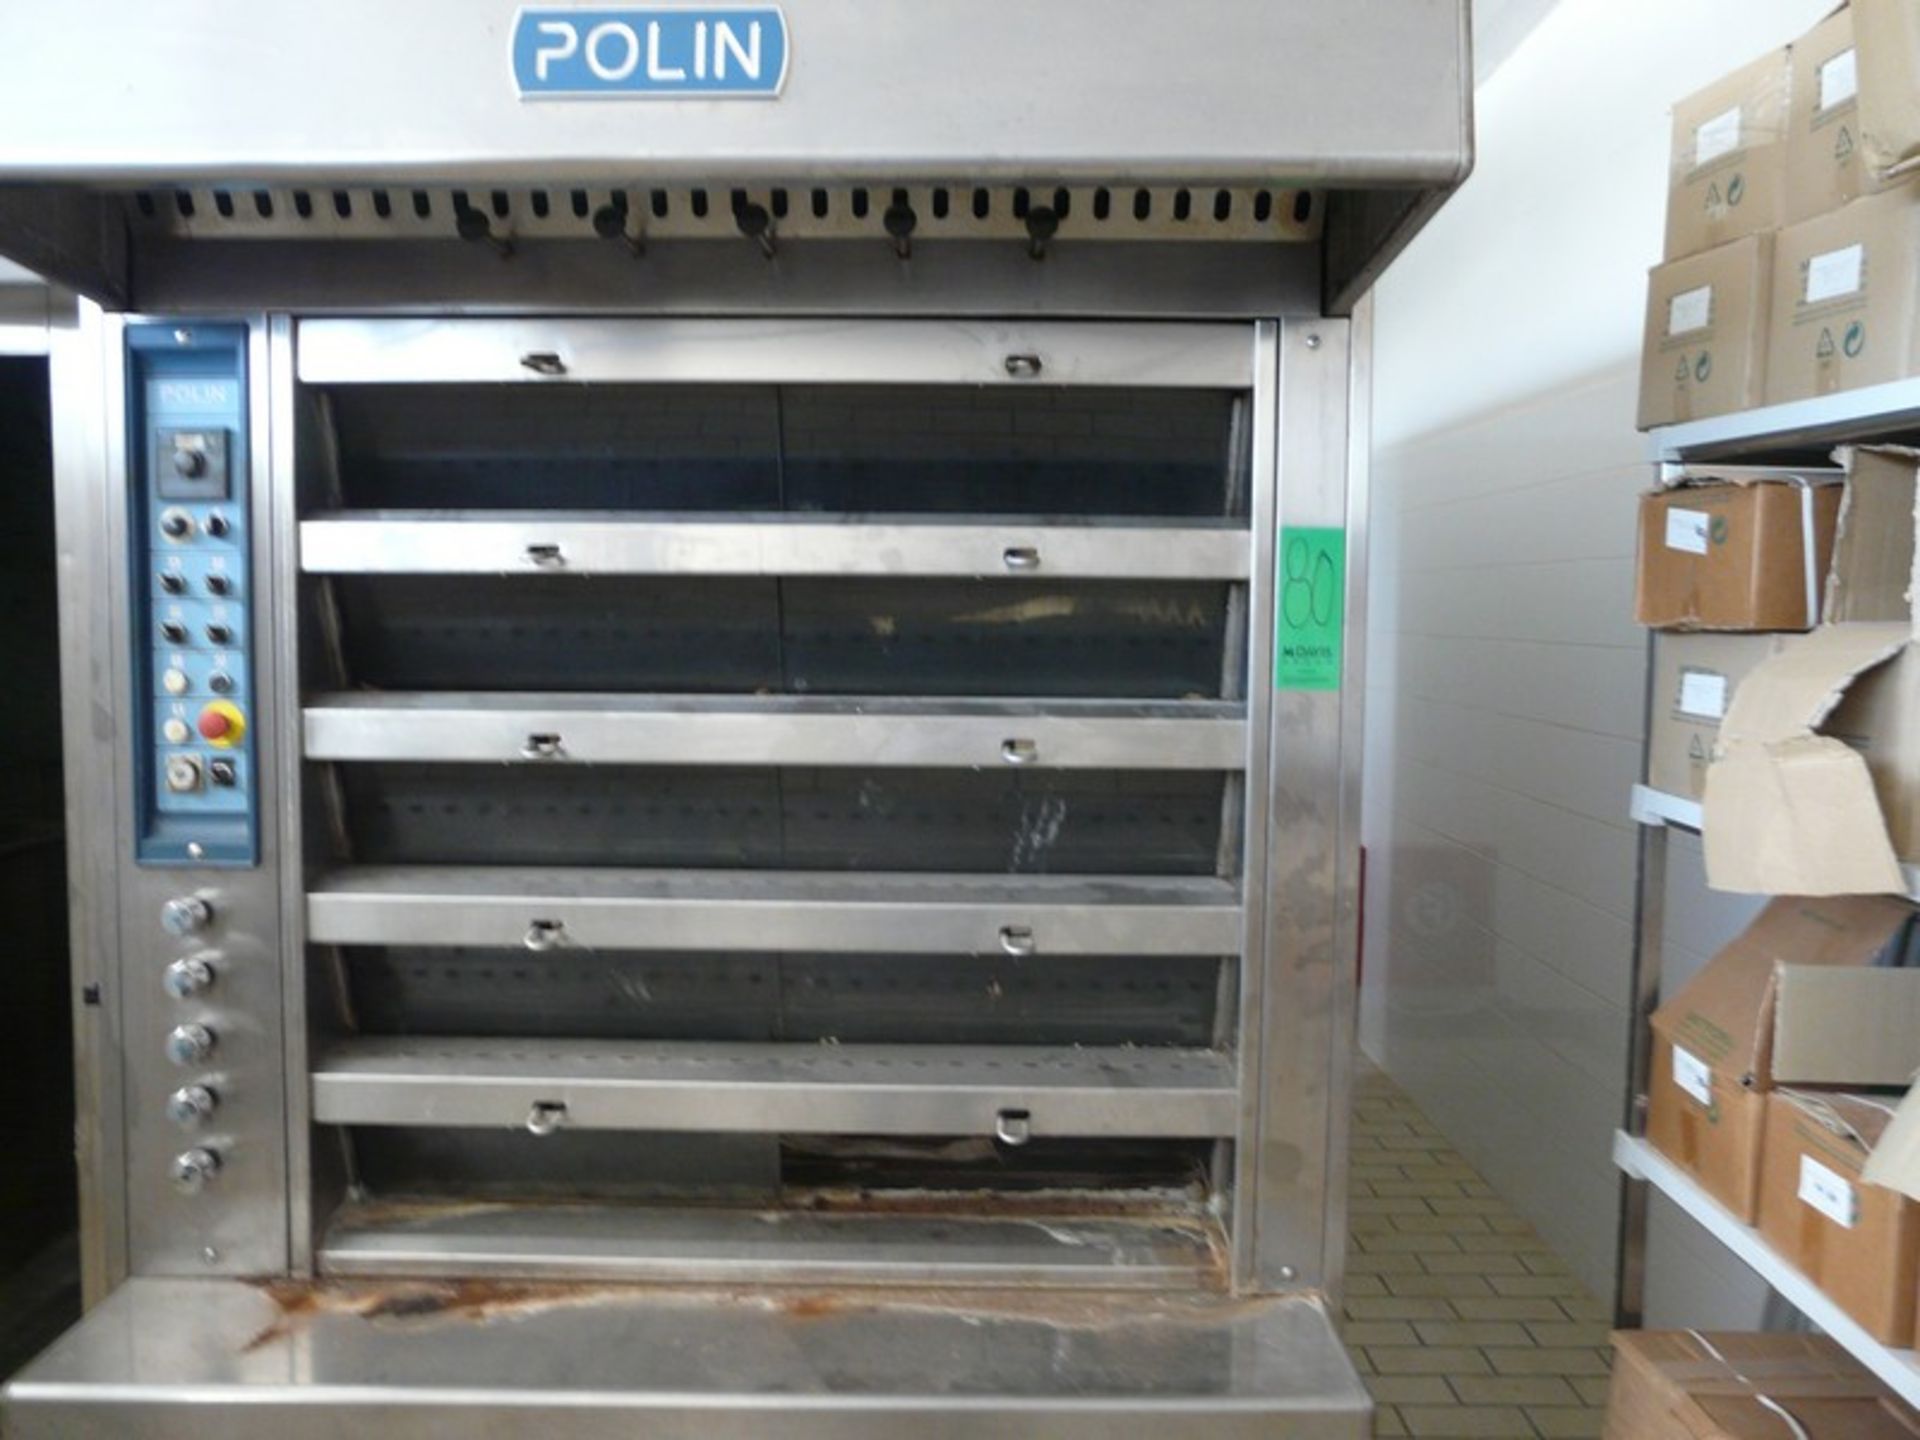 English: POLIN Oven With 10 Stations, Humidity, Gas Burner, Y.O.M.: 2003, Construction Stainless - Image 2 of 12